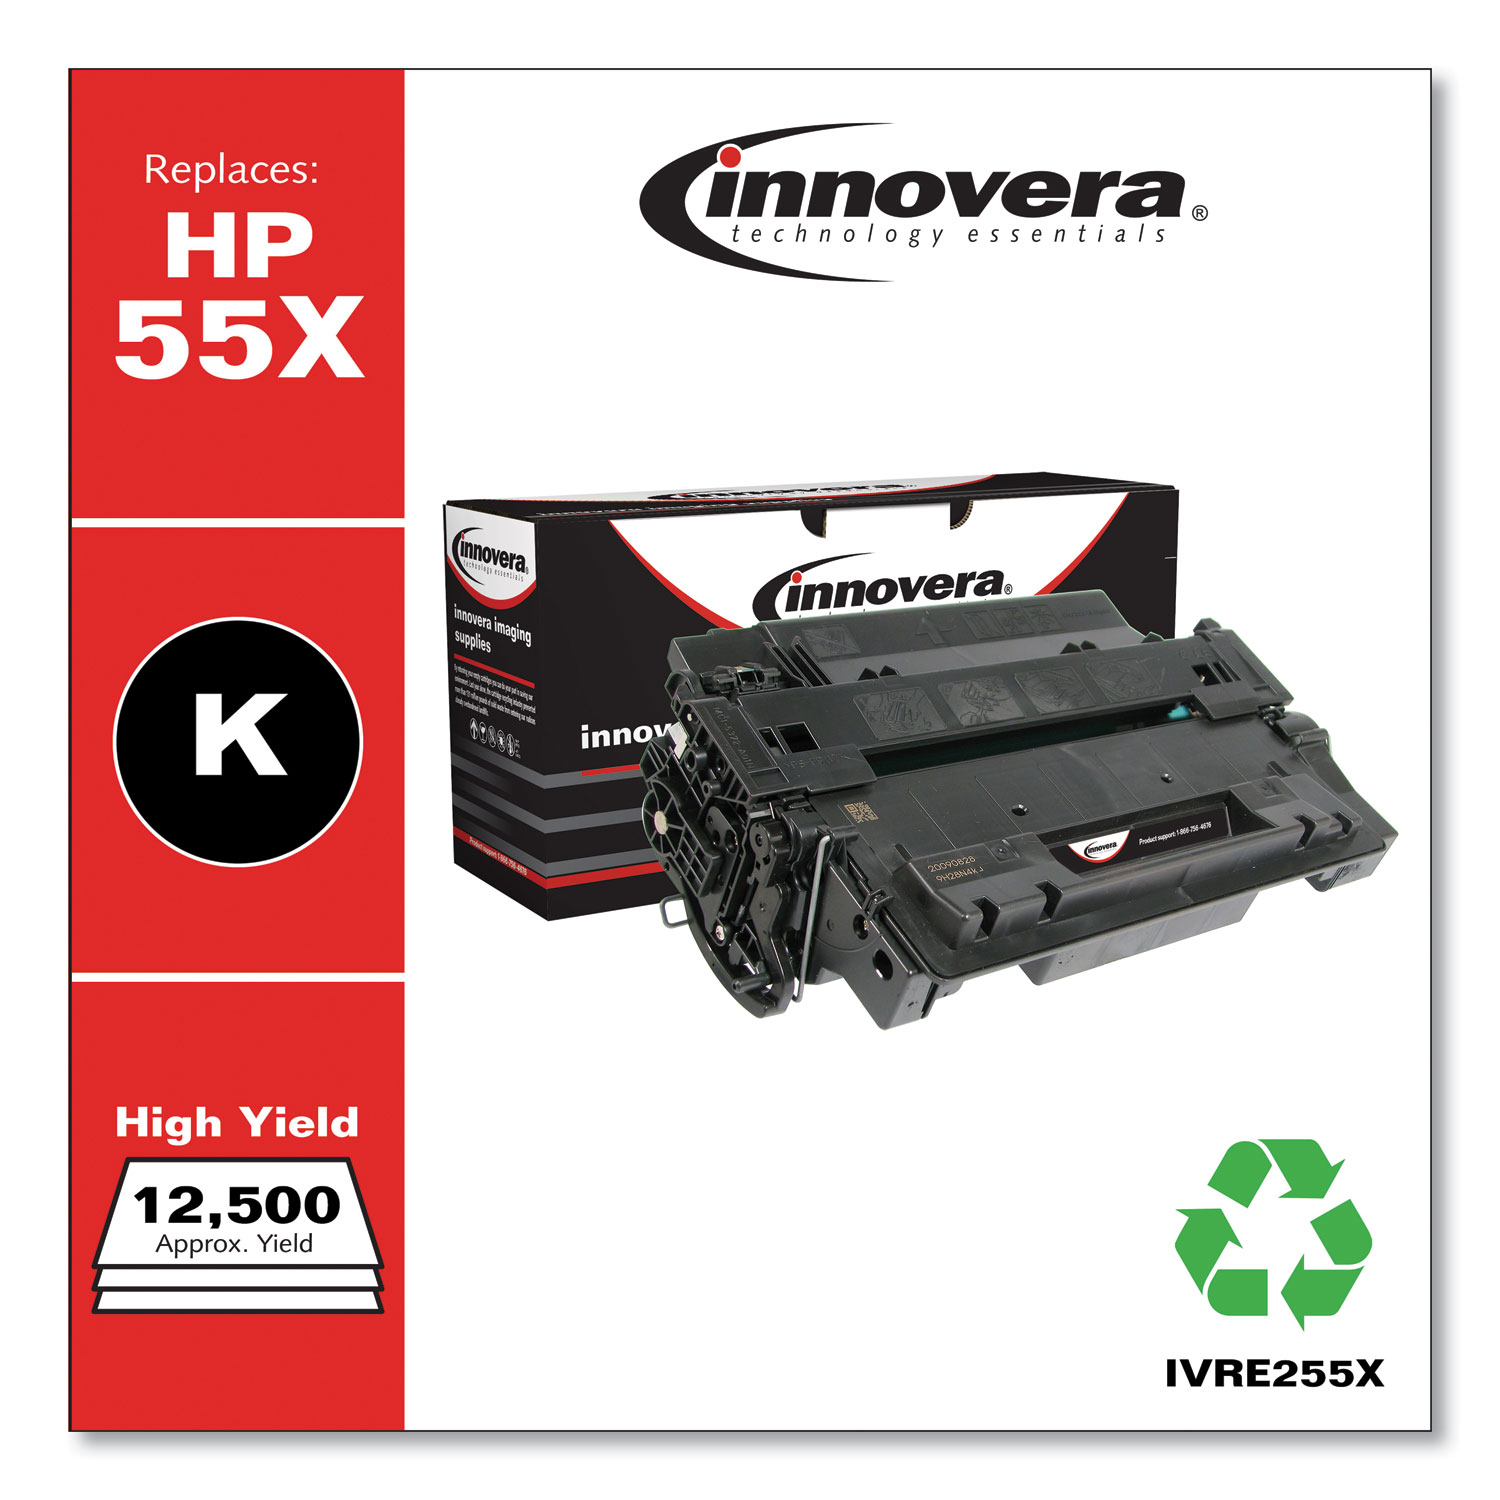  Innovera IVRE255X Remanufactured CE255X (55X) High-Yield Toner, 12500 Page-Yield, Black (IVRE255X) 